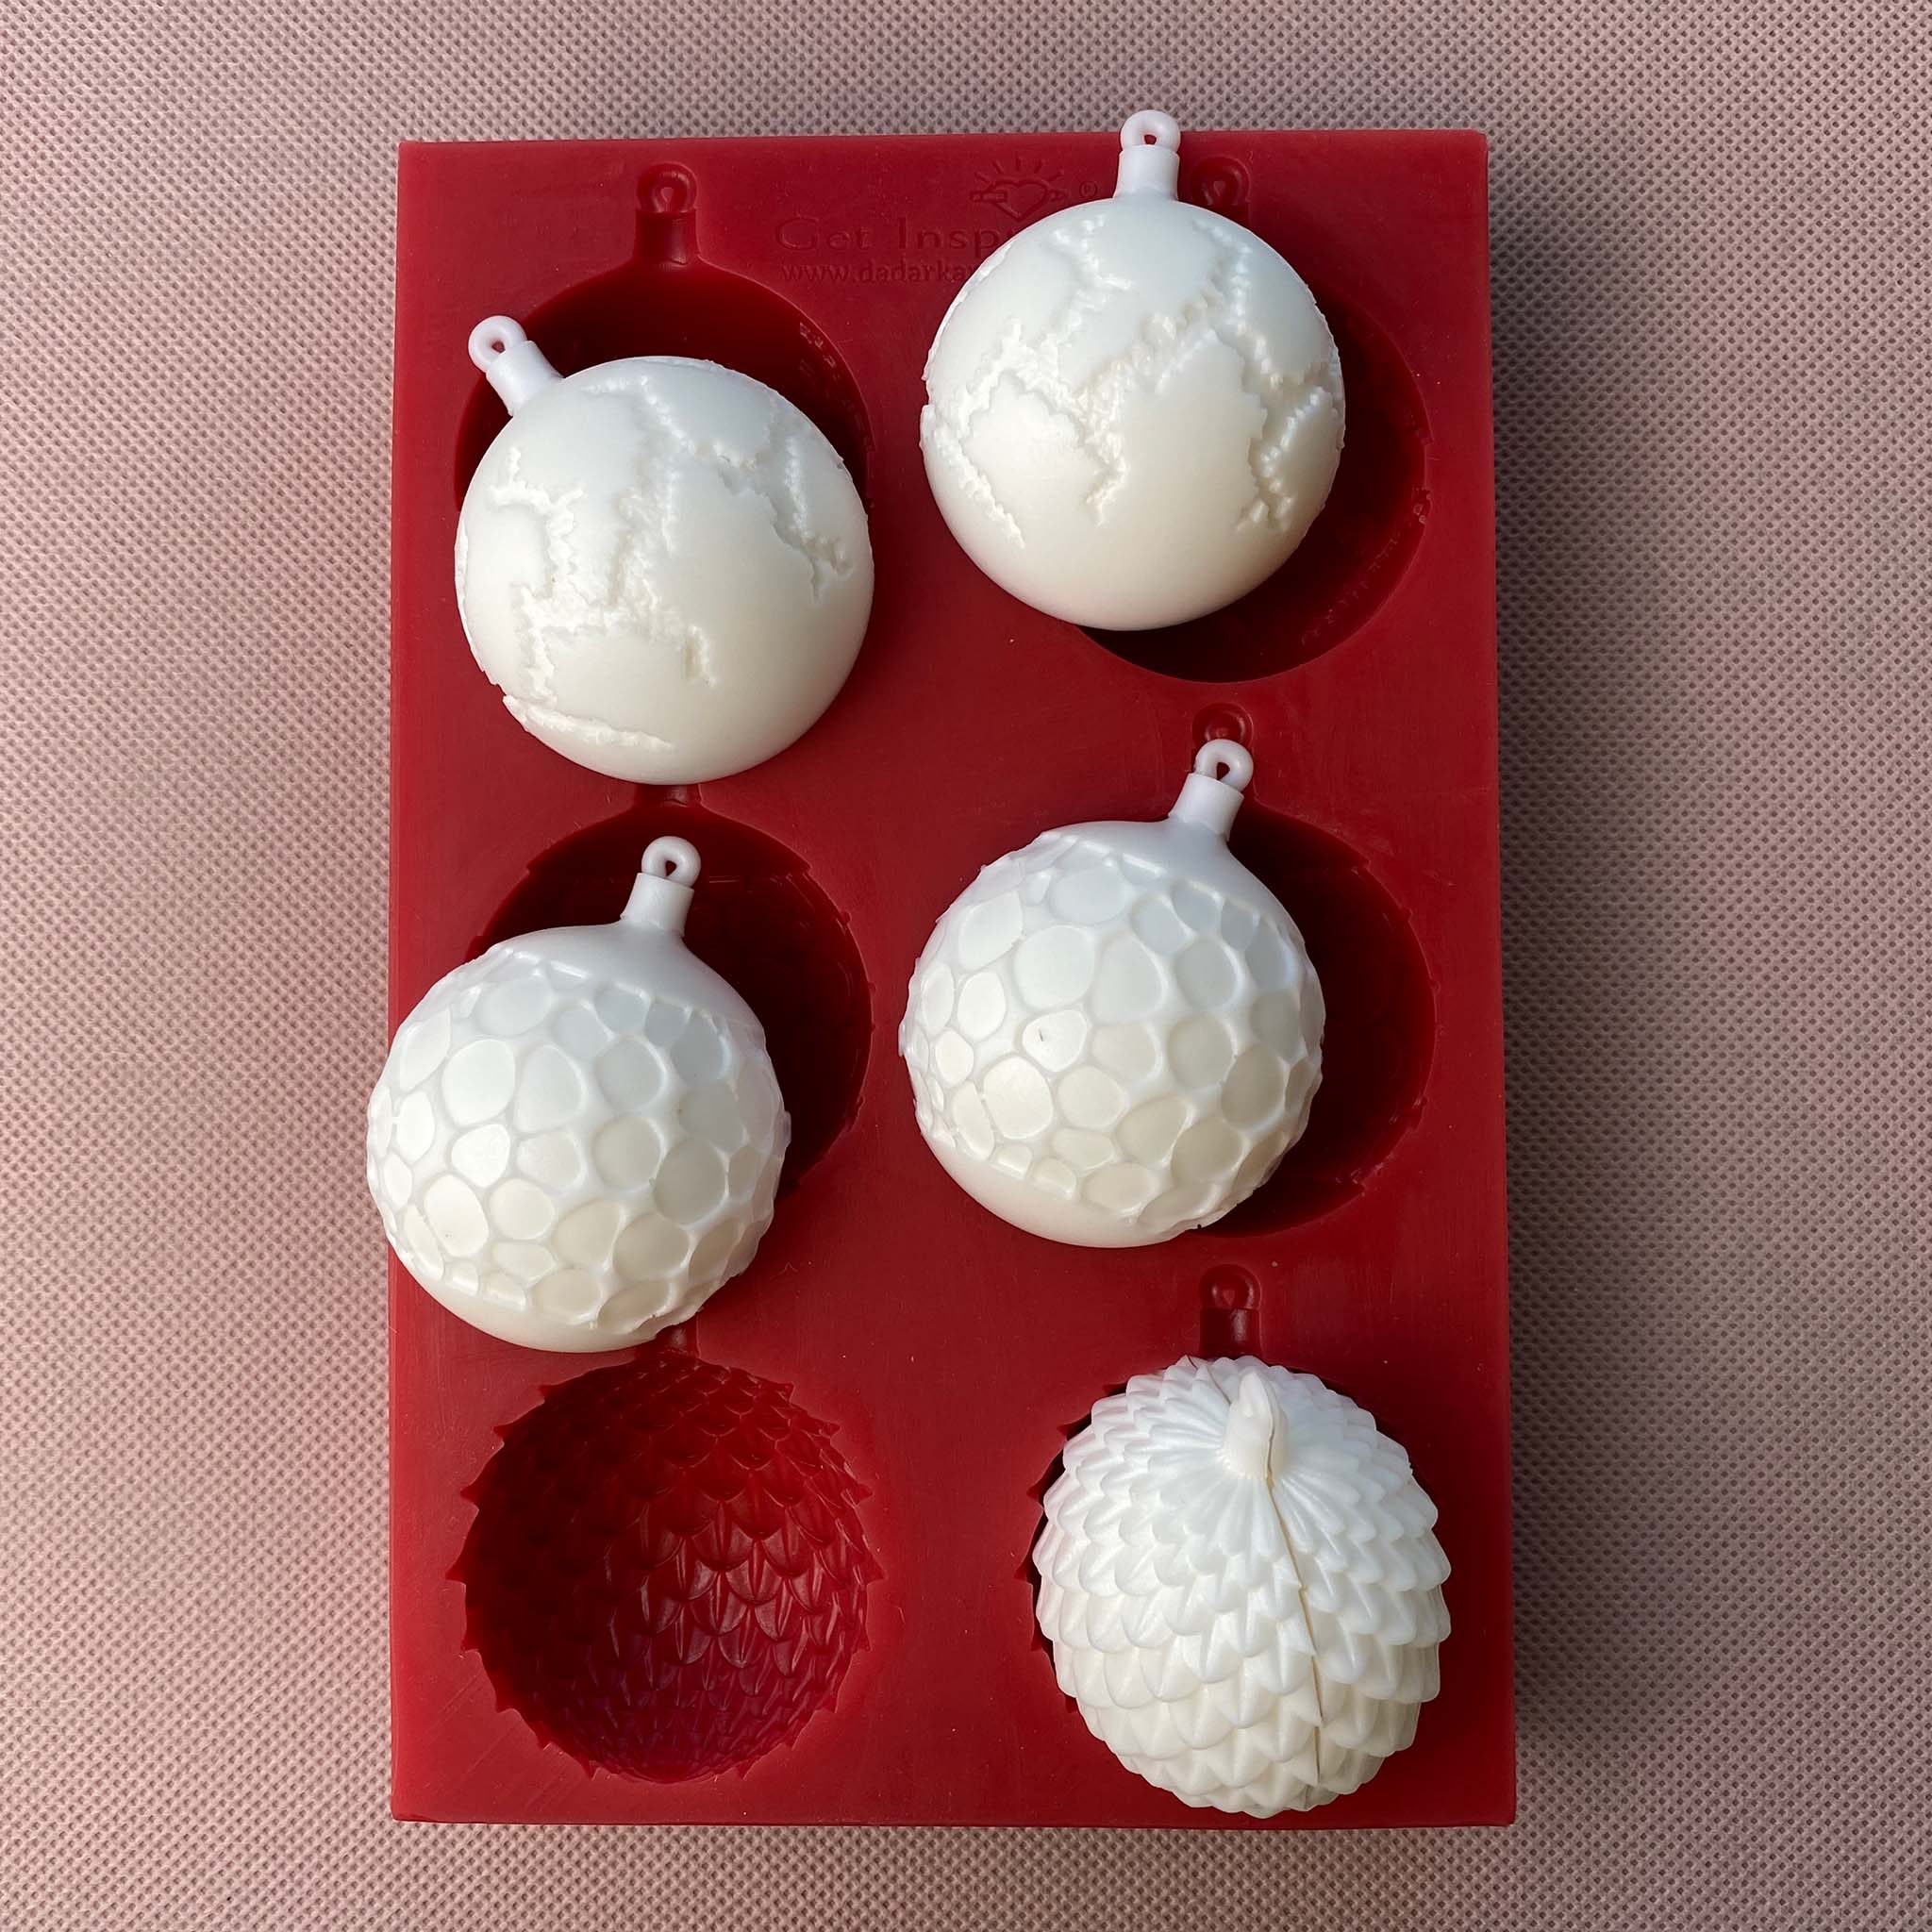 A red silicone mould of Get Inspired by Dadarkar Art's Christmas Ornaments is against a light material background. On the mould are white resin castings of the ornaments, the bottom of which shows how 2 halves can be put together to create a full ornament.